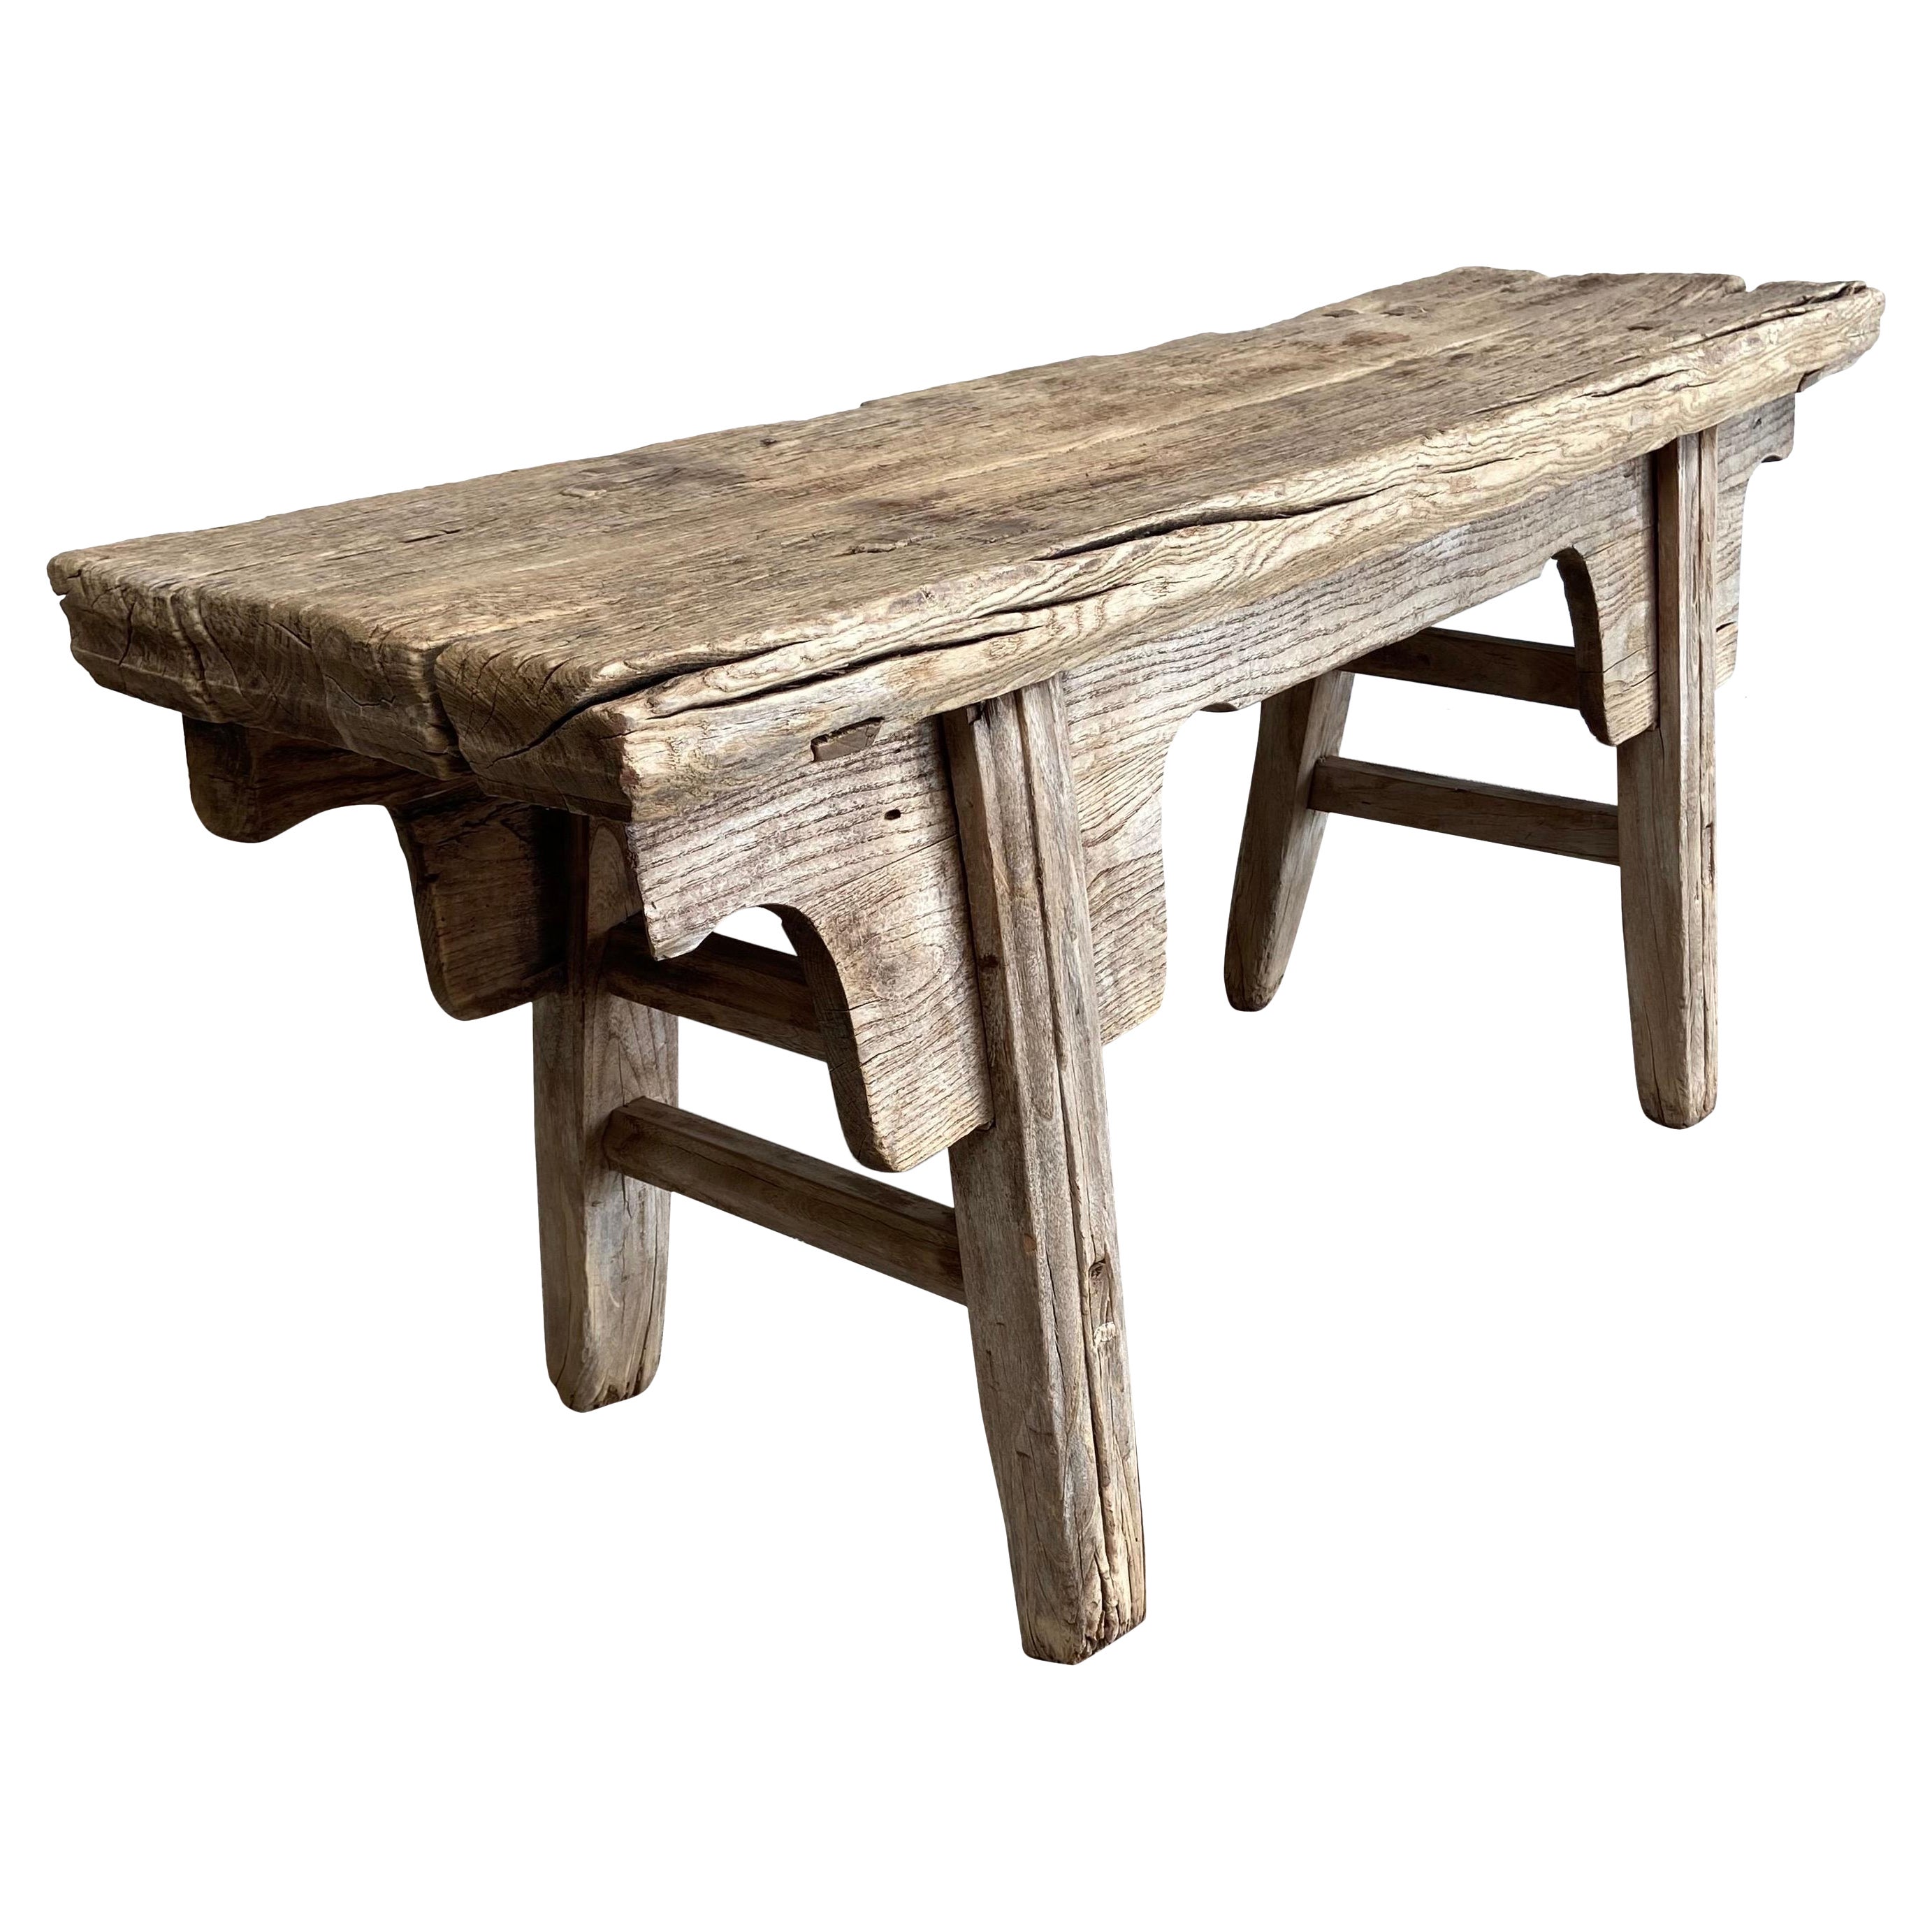 Vintage Elm Wood Bench with Apron